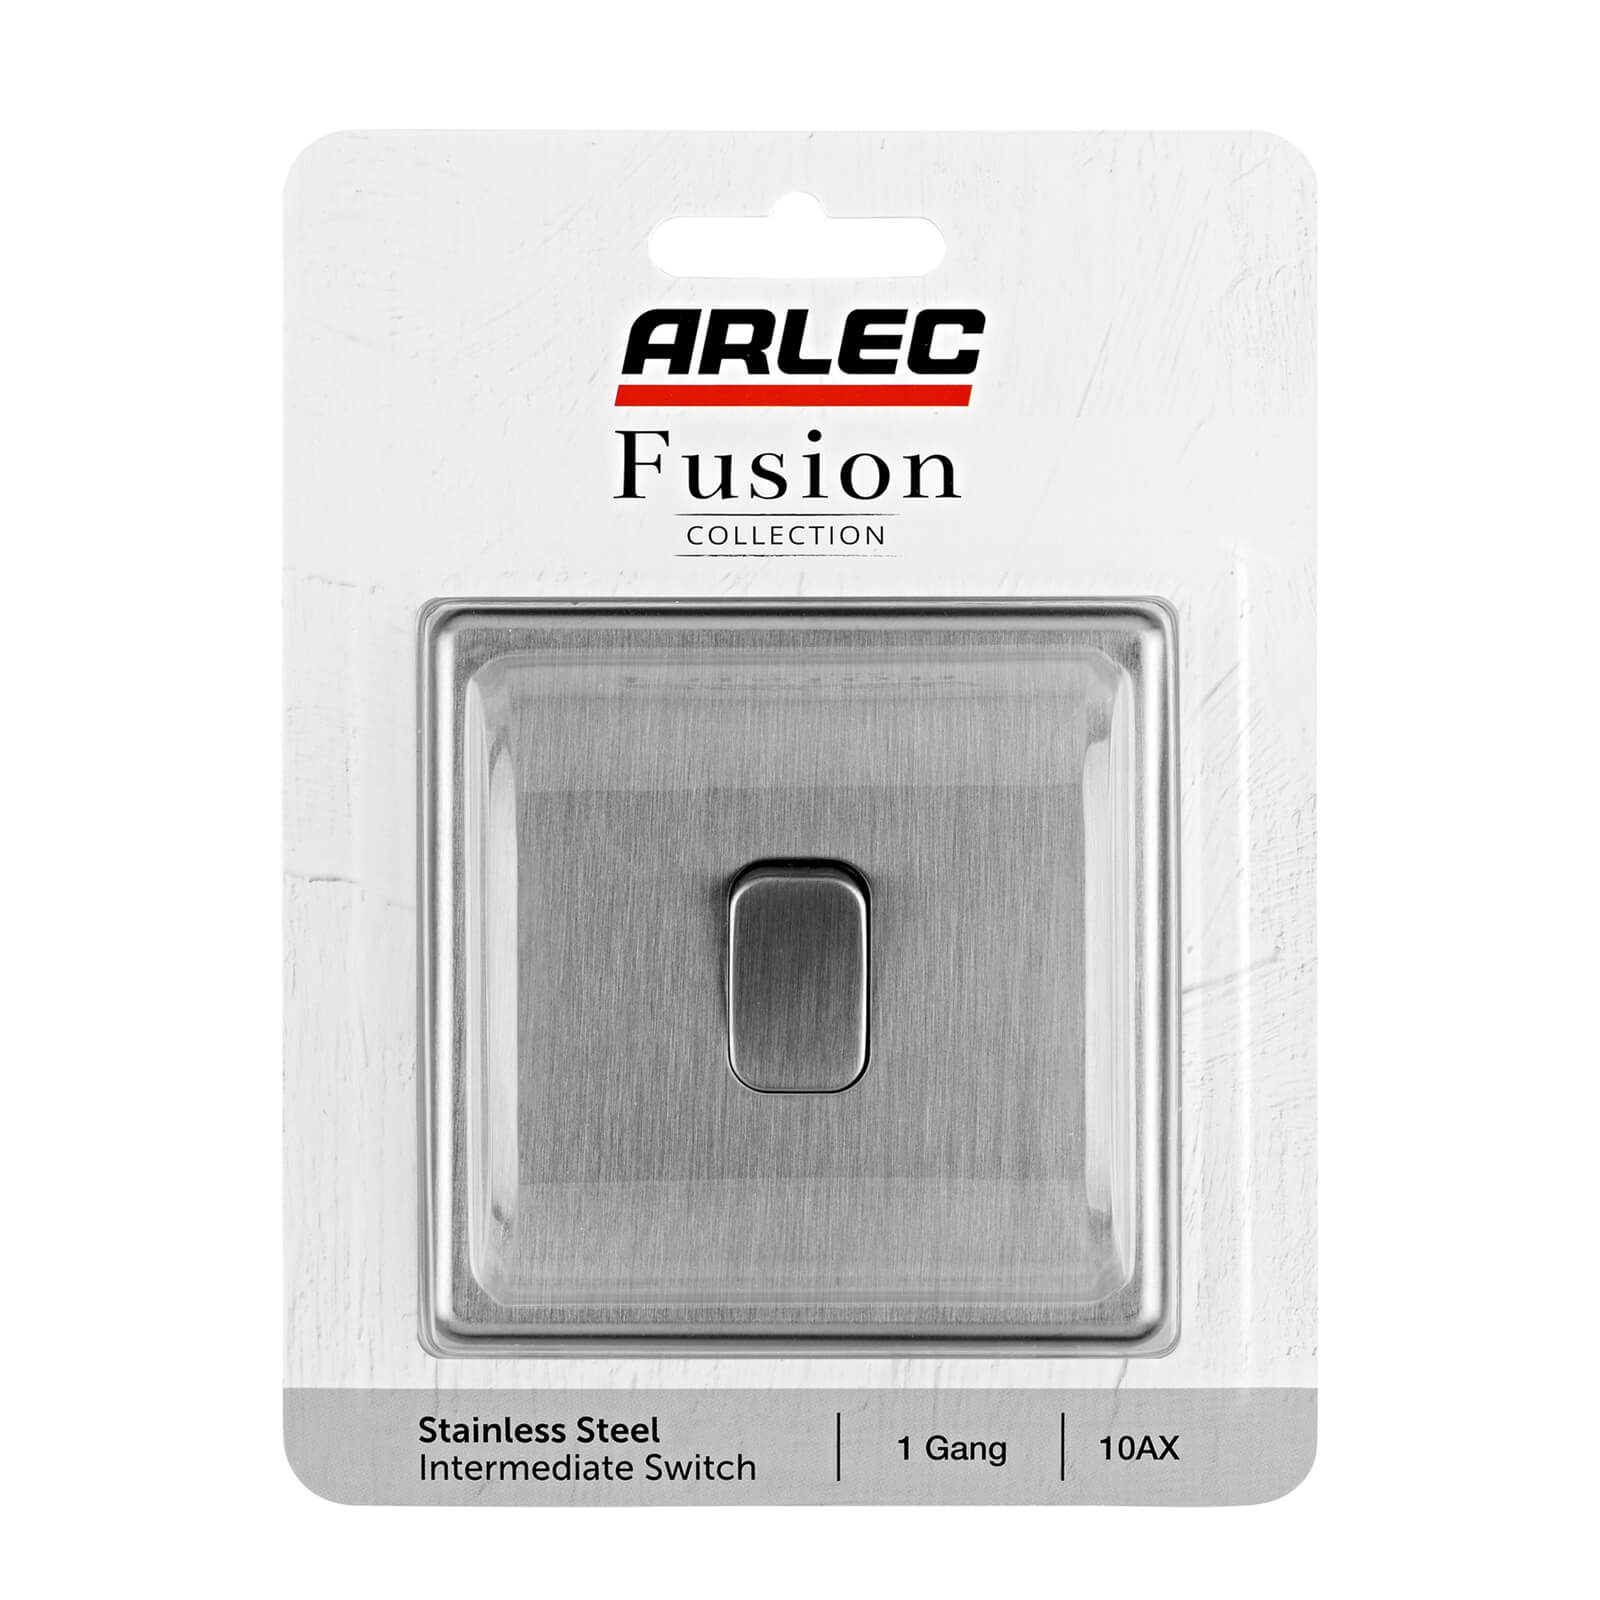 Arlec Fusion 10A 1Gang 2Way Stainless Steel Fusion Single intermediate switch